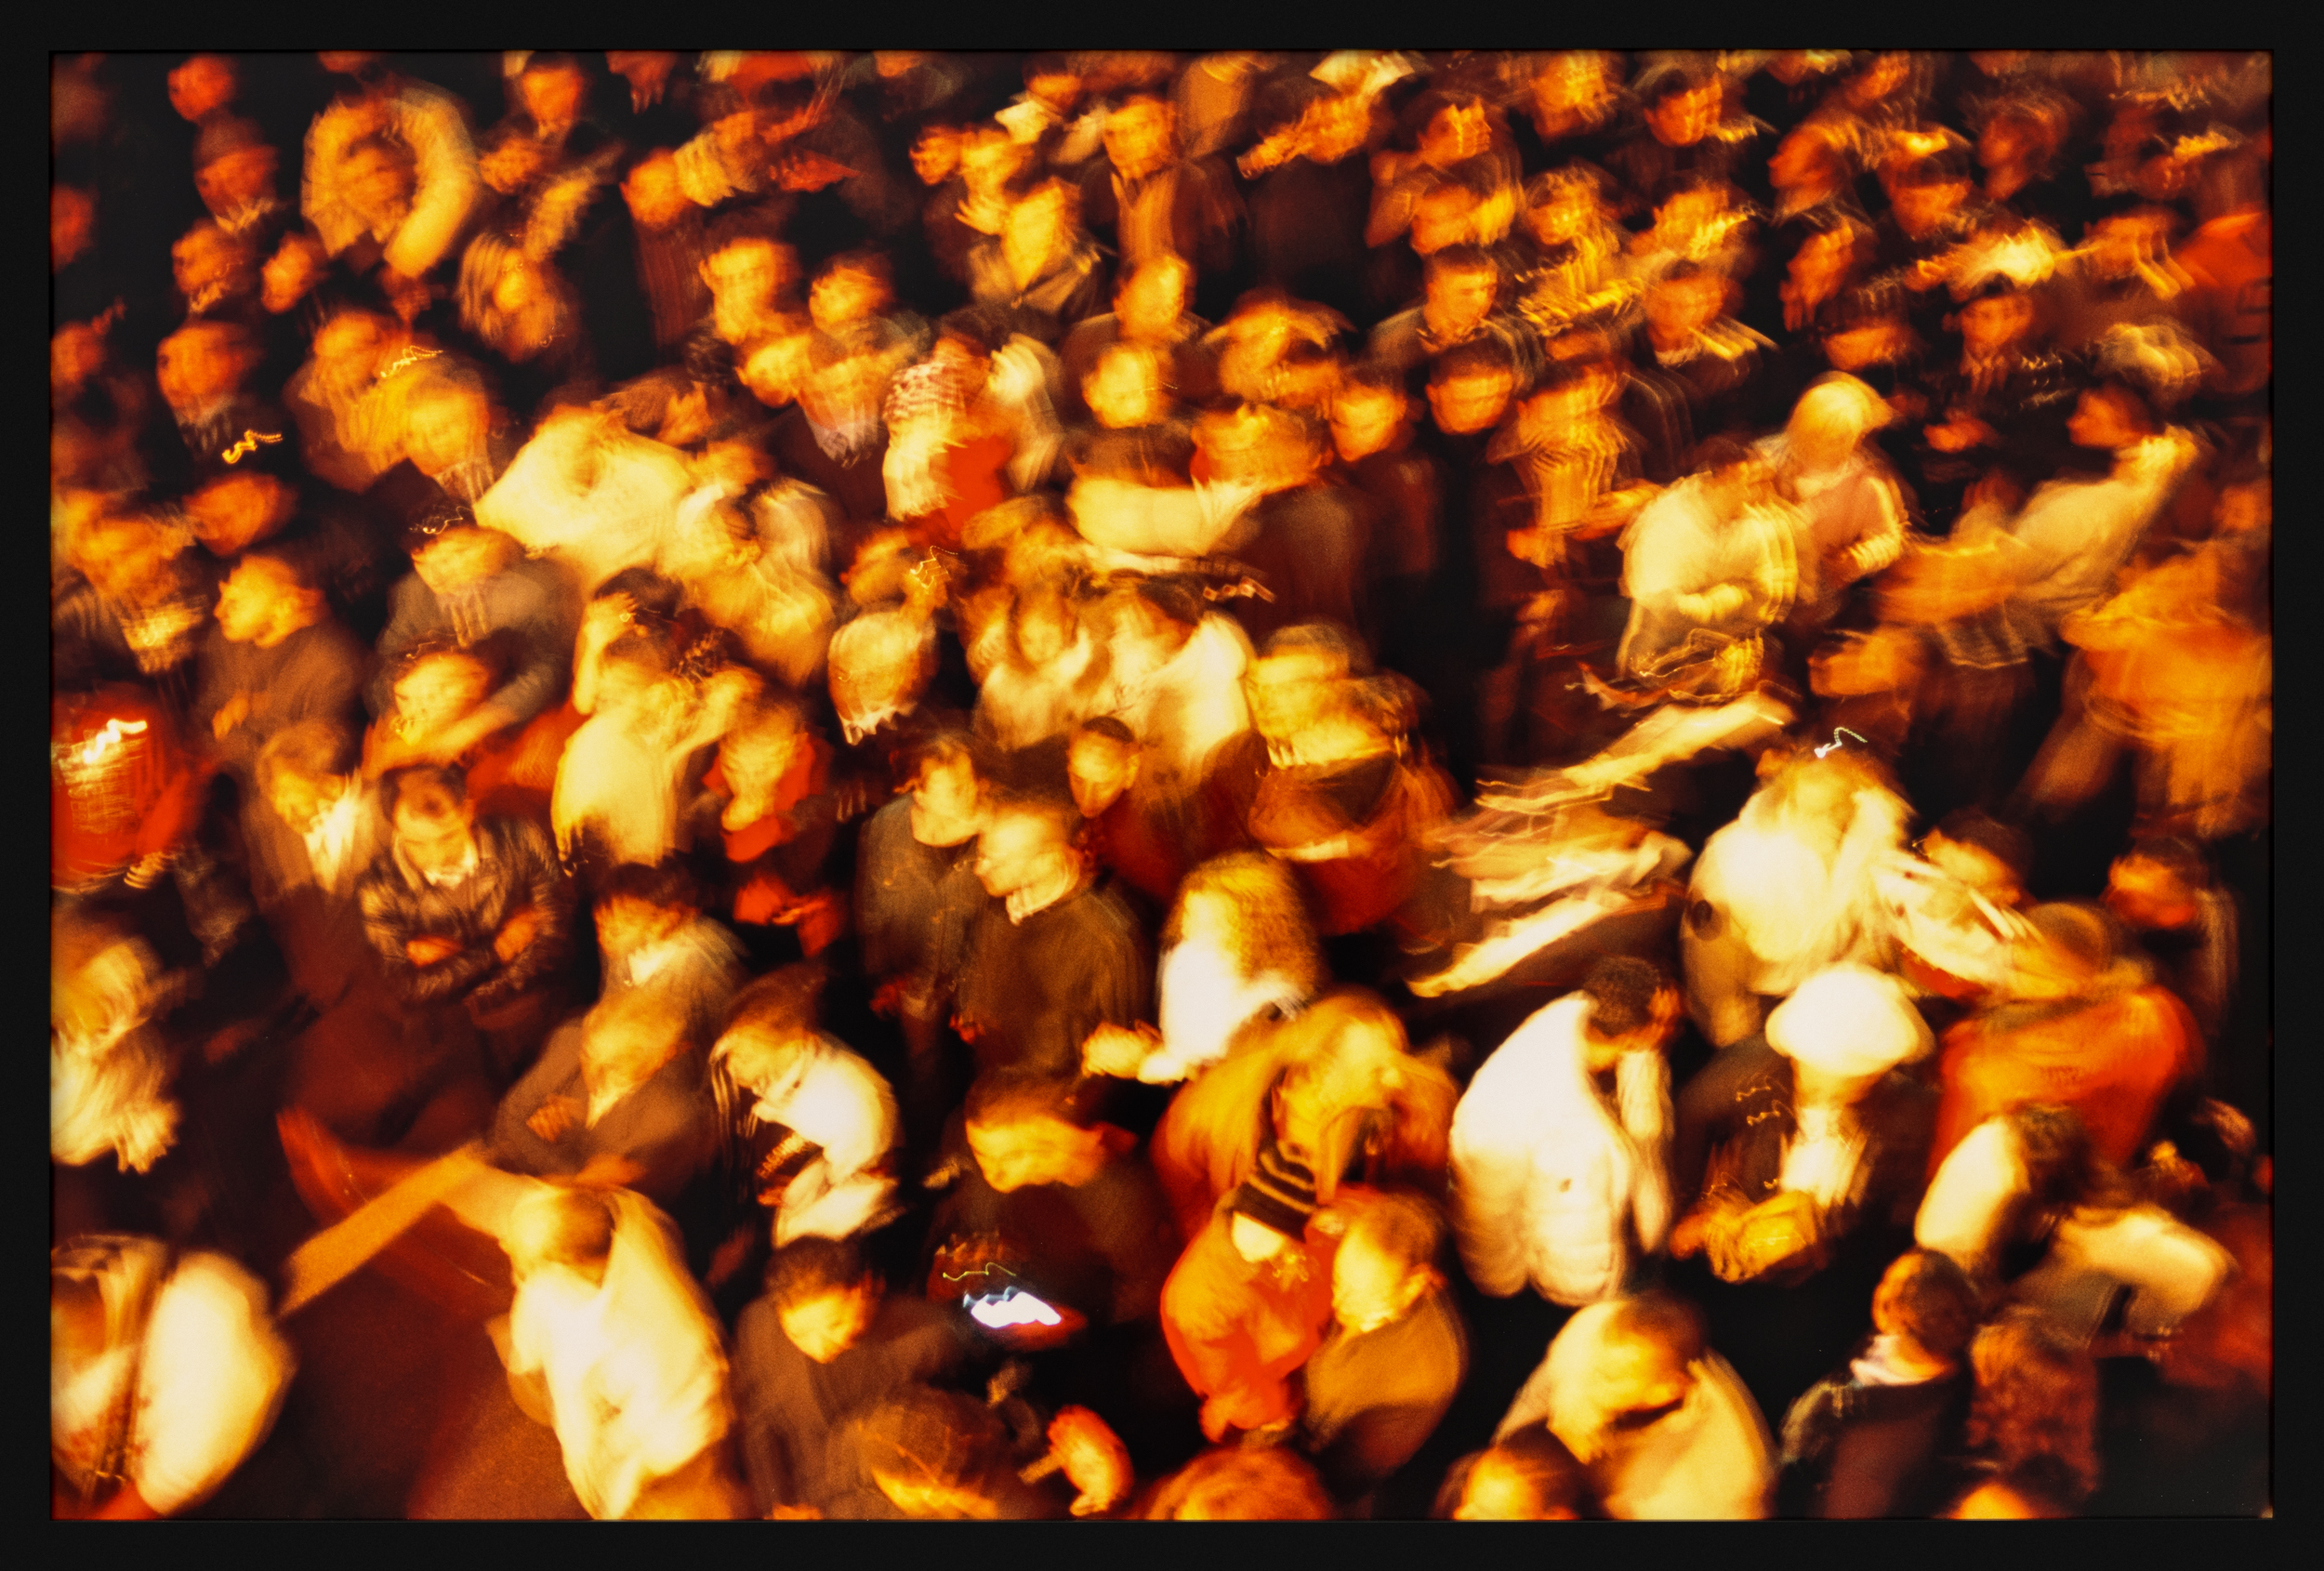 Color image depicting a warm colored crowd of people seen from above with motion blur